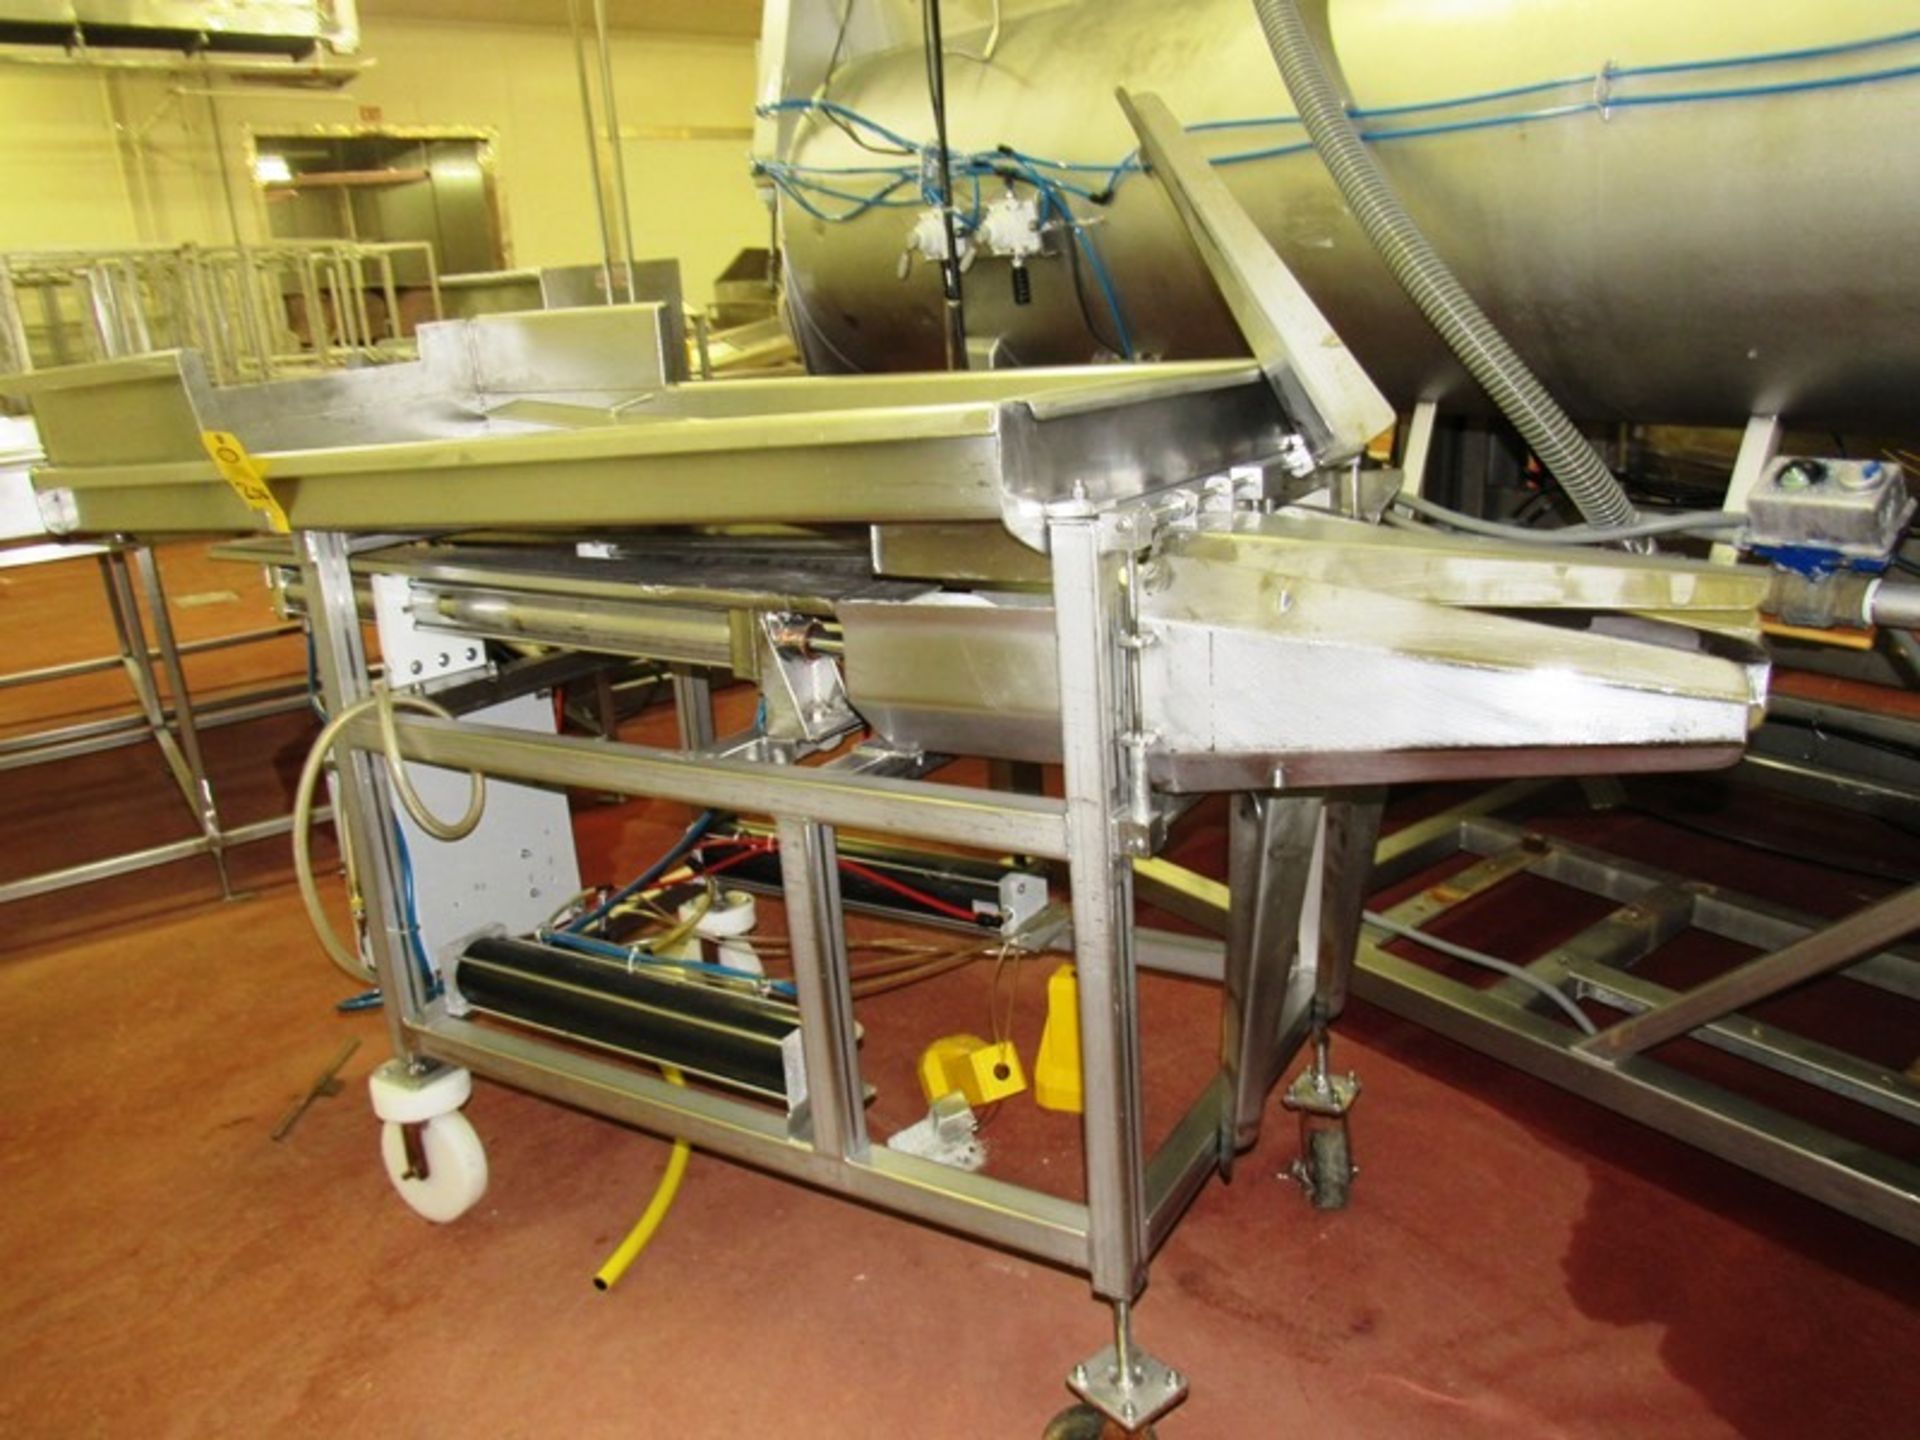 Stainless Steel Pneumatic Piston Ham Loader, dual pistons, foot pedals activation, 36" W X 72" L